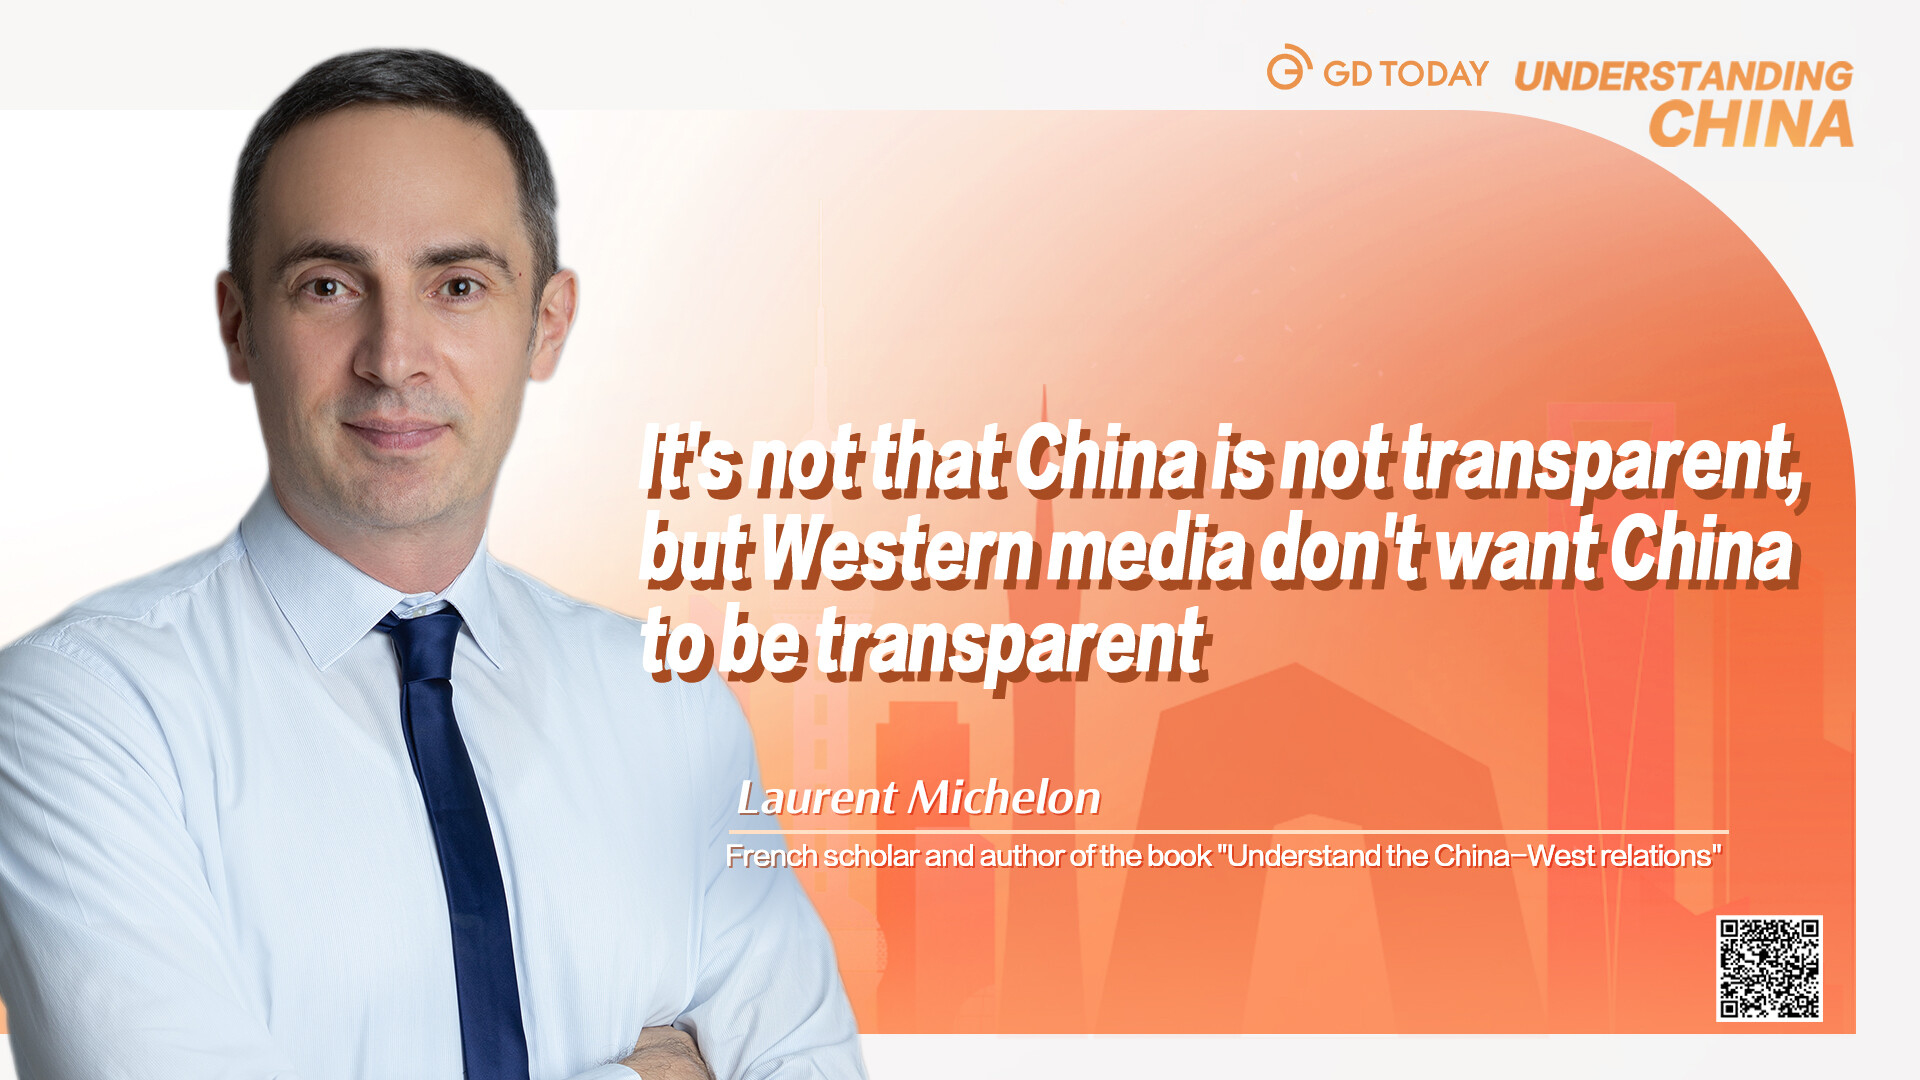 It's not that China is not transparent, but Western media don't want China to be transparent: French scholar